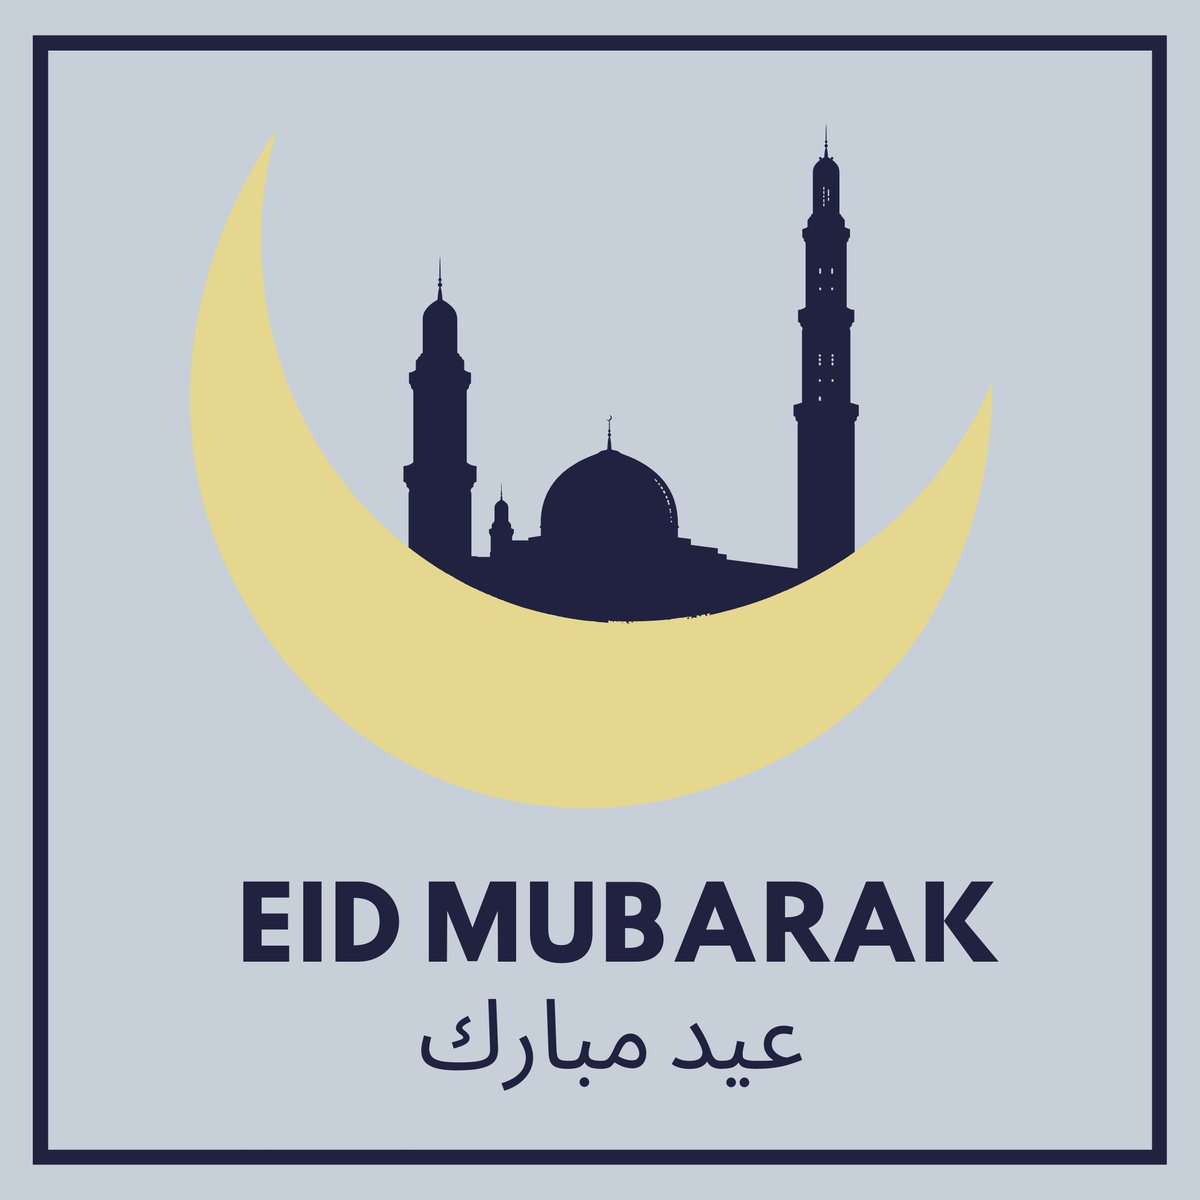 Eid Mubarak to everyone celebrating! Wishing happiness, peace and prosperity to you and your family.